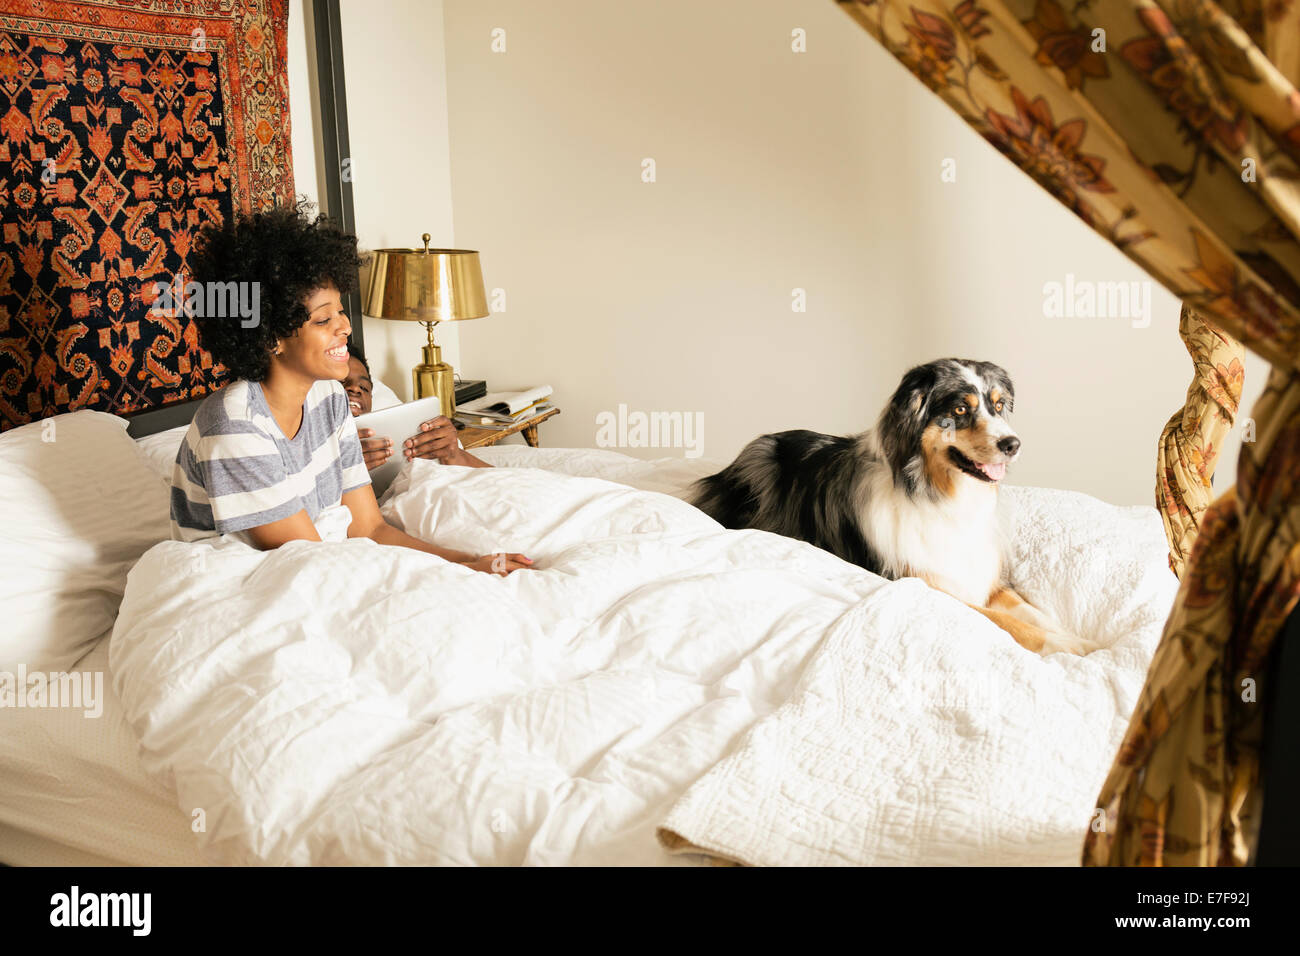 Mixed Race woman with dog in bed Banque D'Images